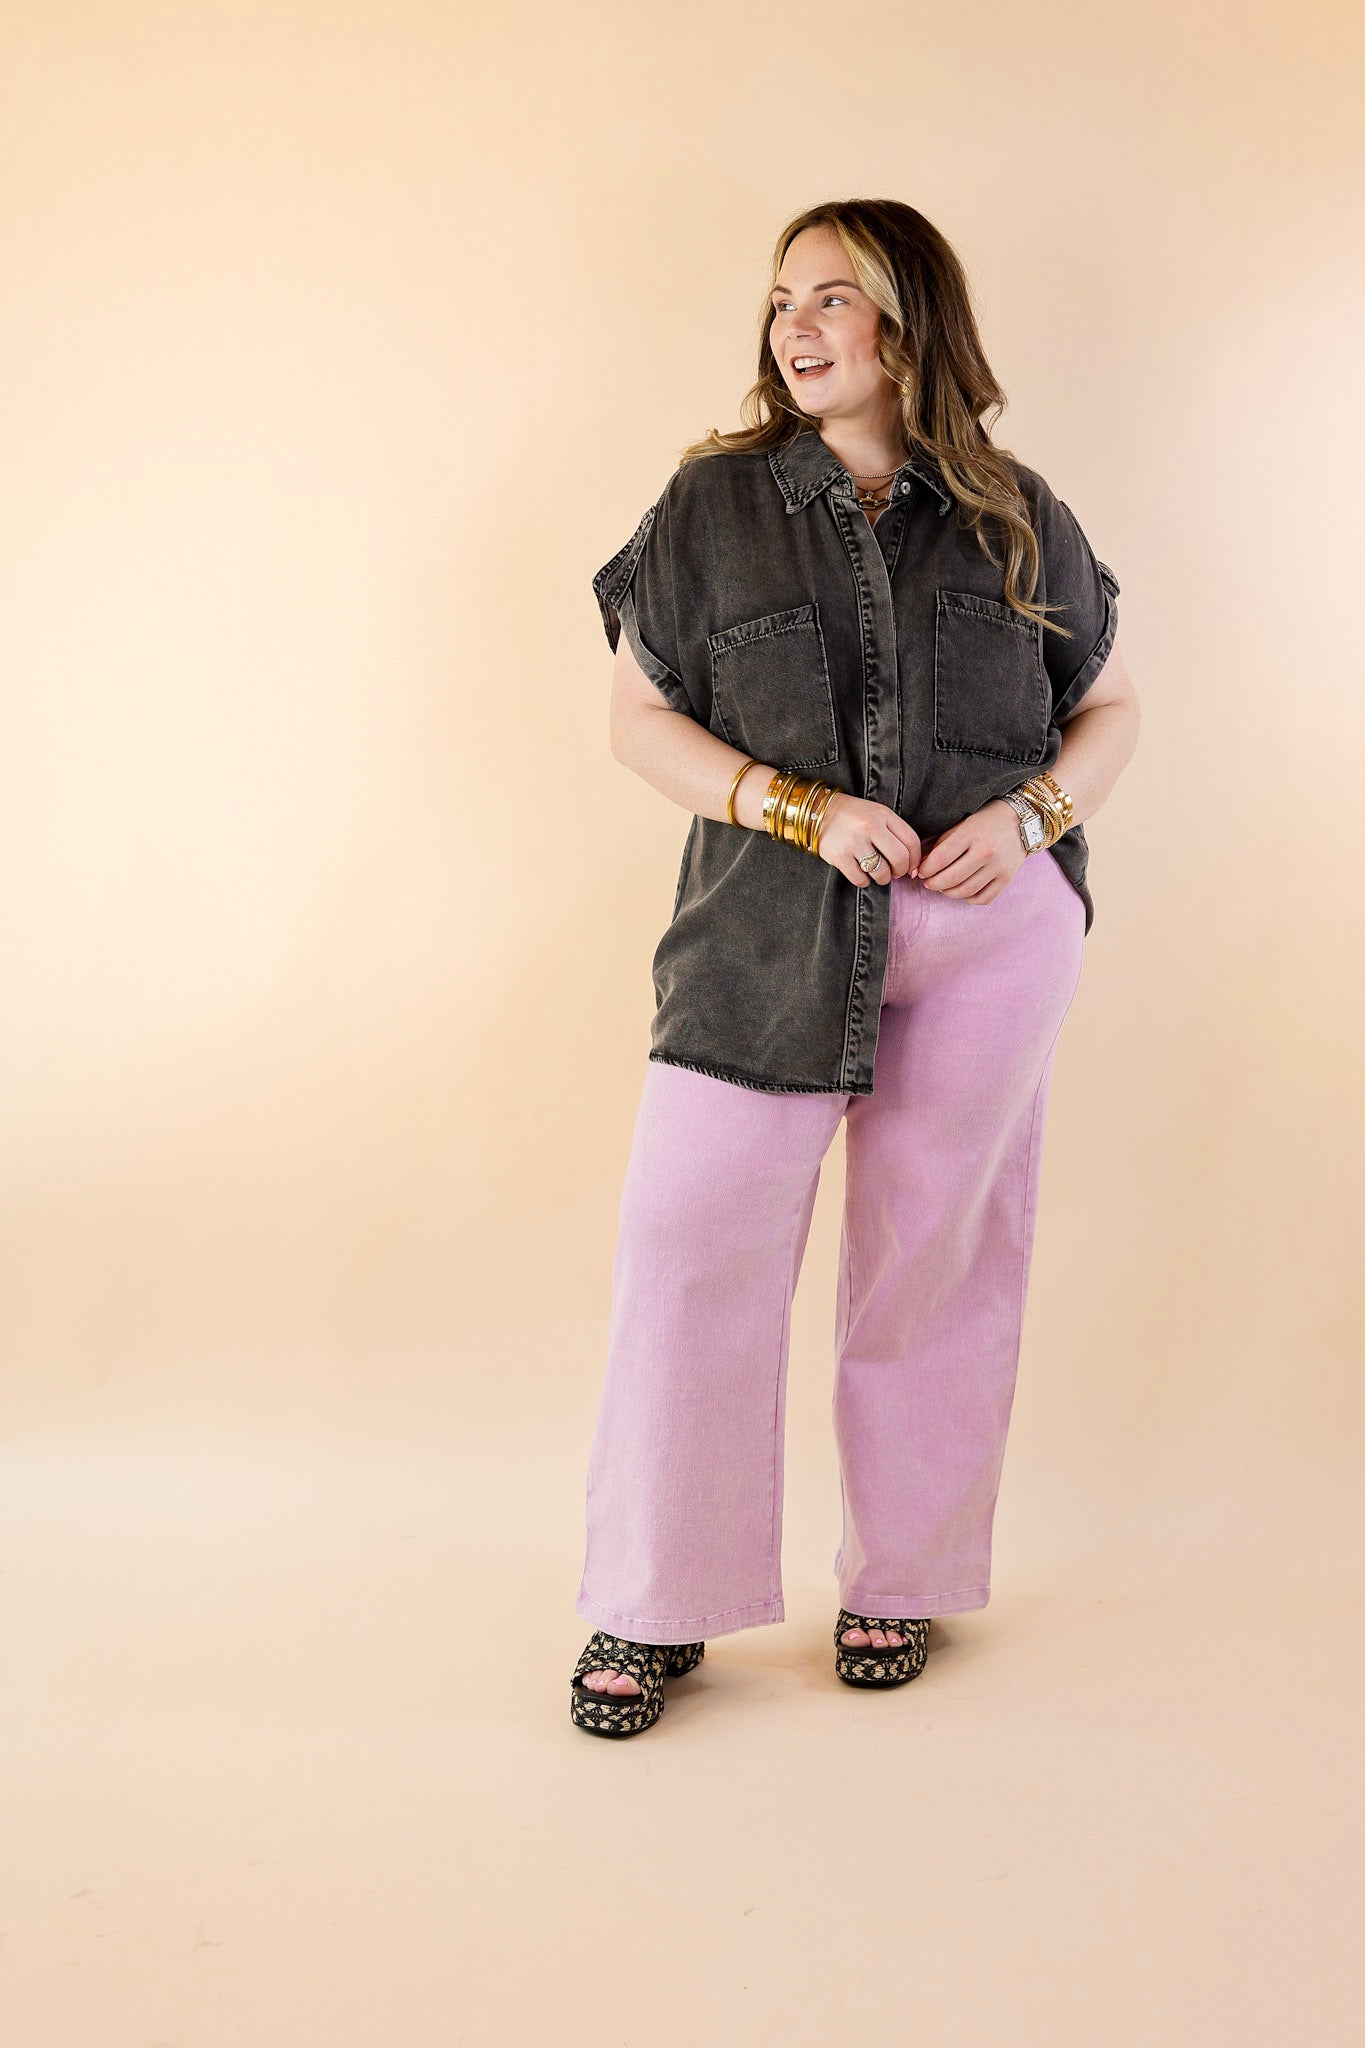 Fast Forward Denim Hidden Button Up Top with Short Sleeves in Black - Giddy Up Glamour Boutique